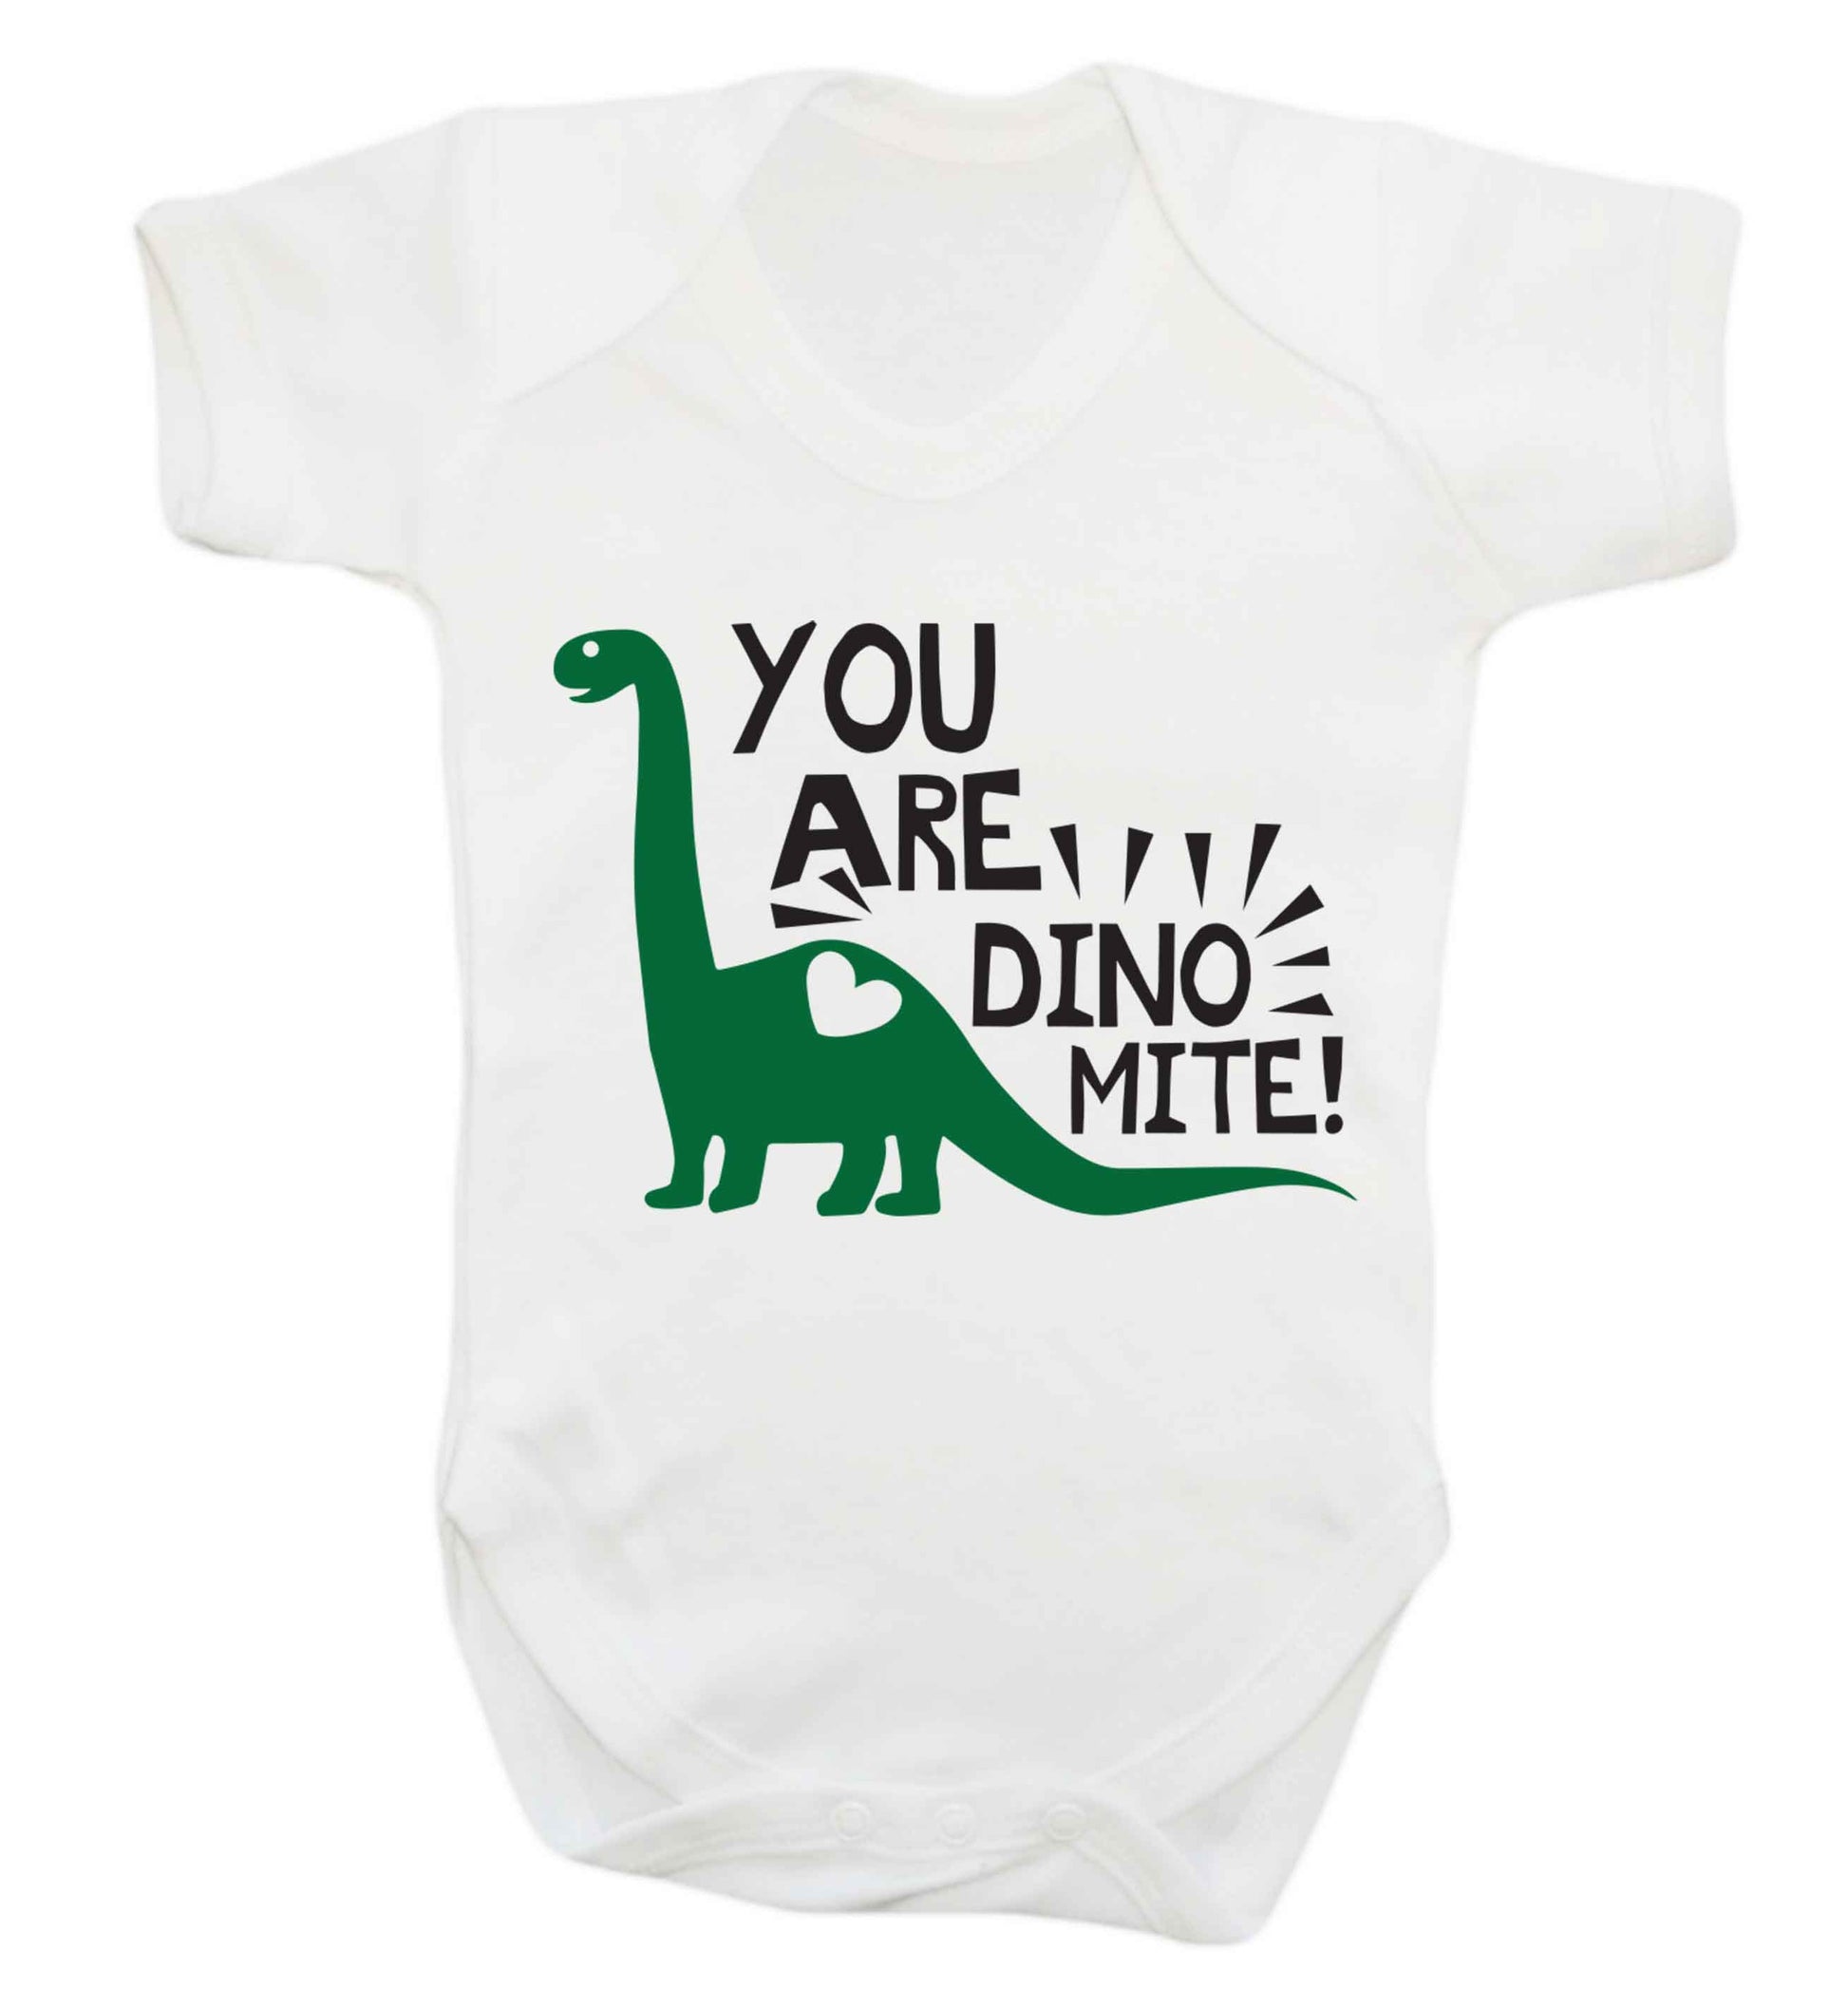 You are dinomite! Baby Vest white 18-24 months